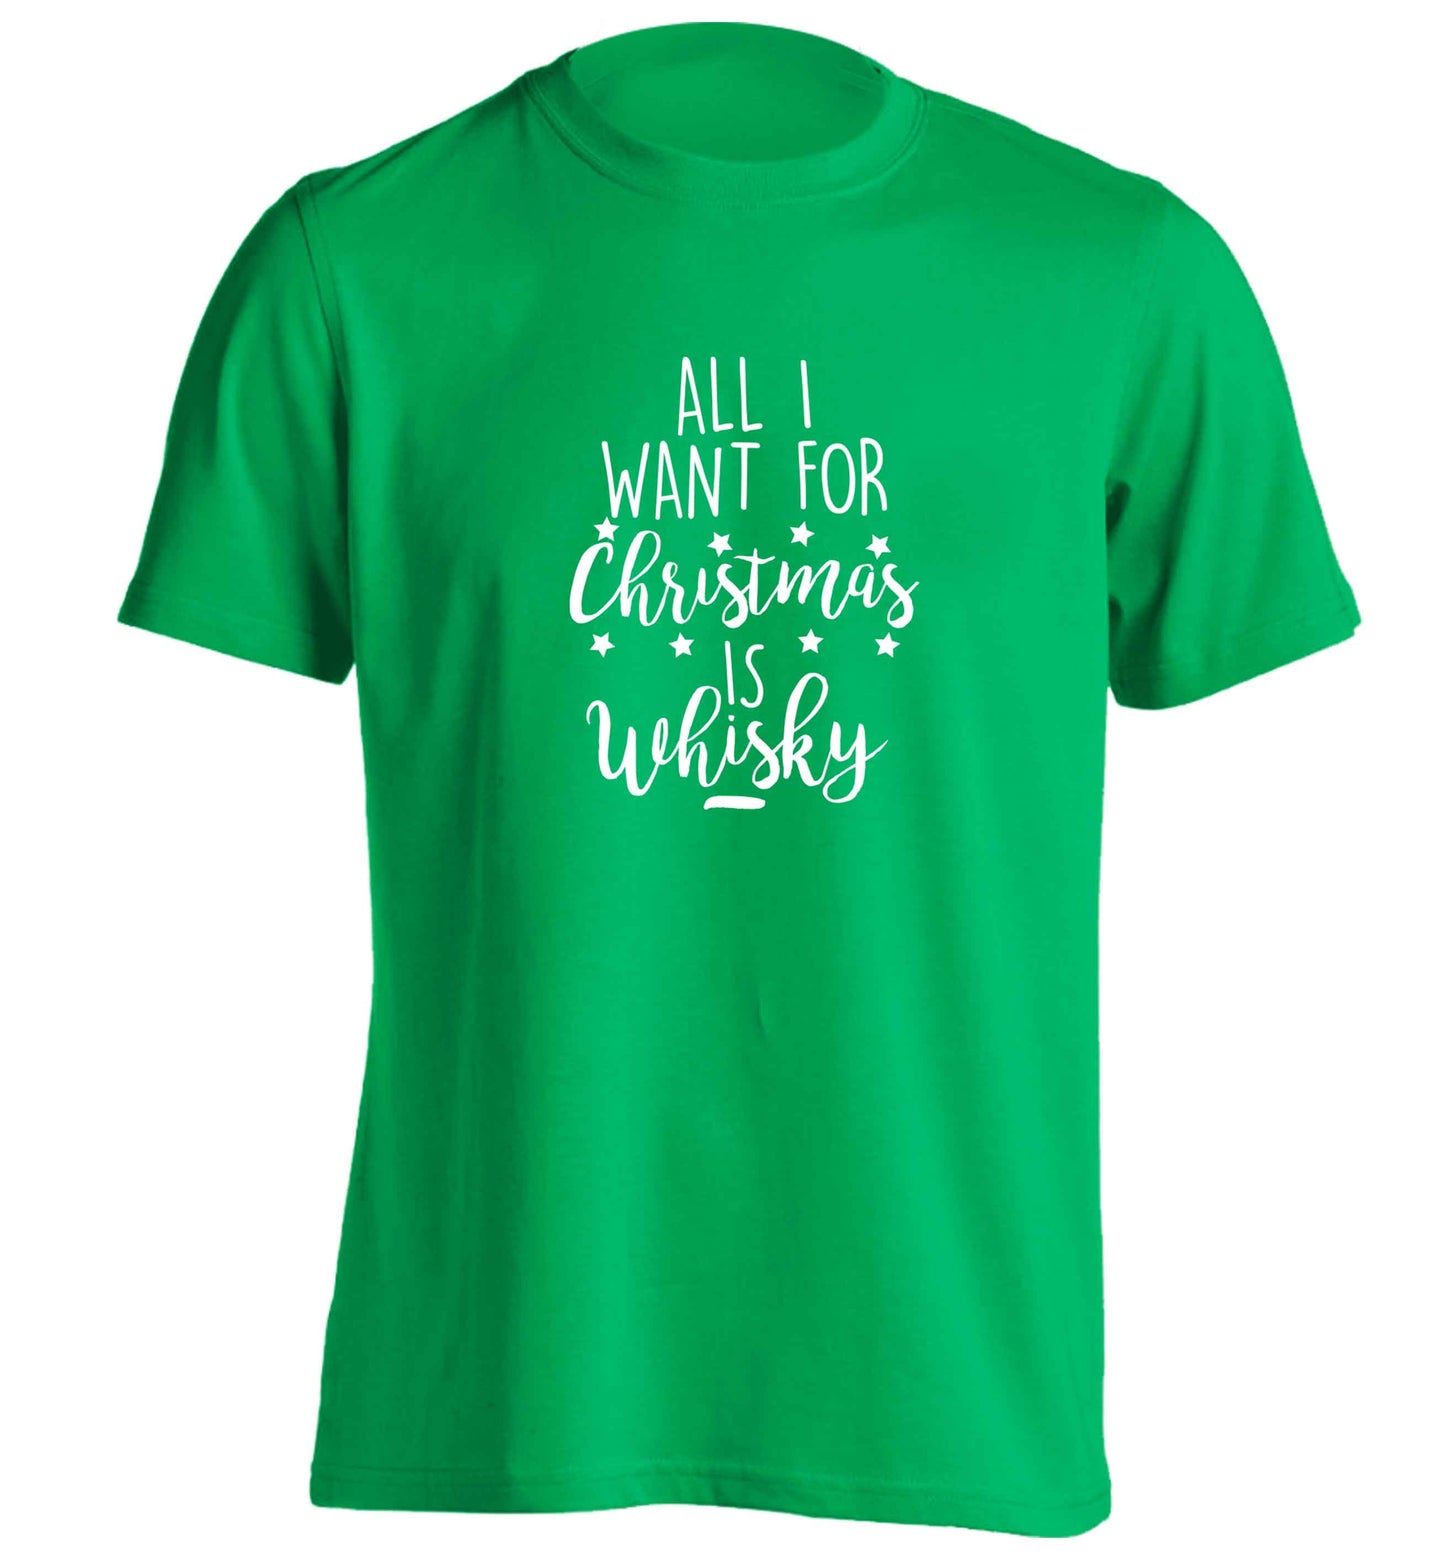 All I want for Christmas is whisky adults unisex green Tshirt 2XL